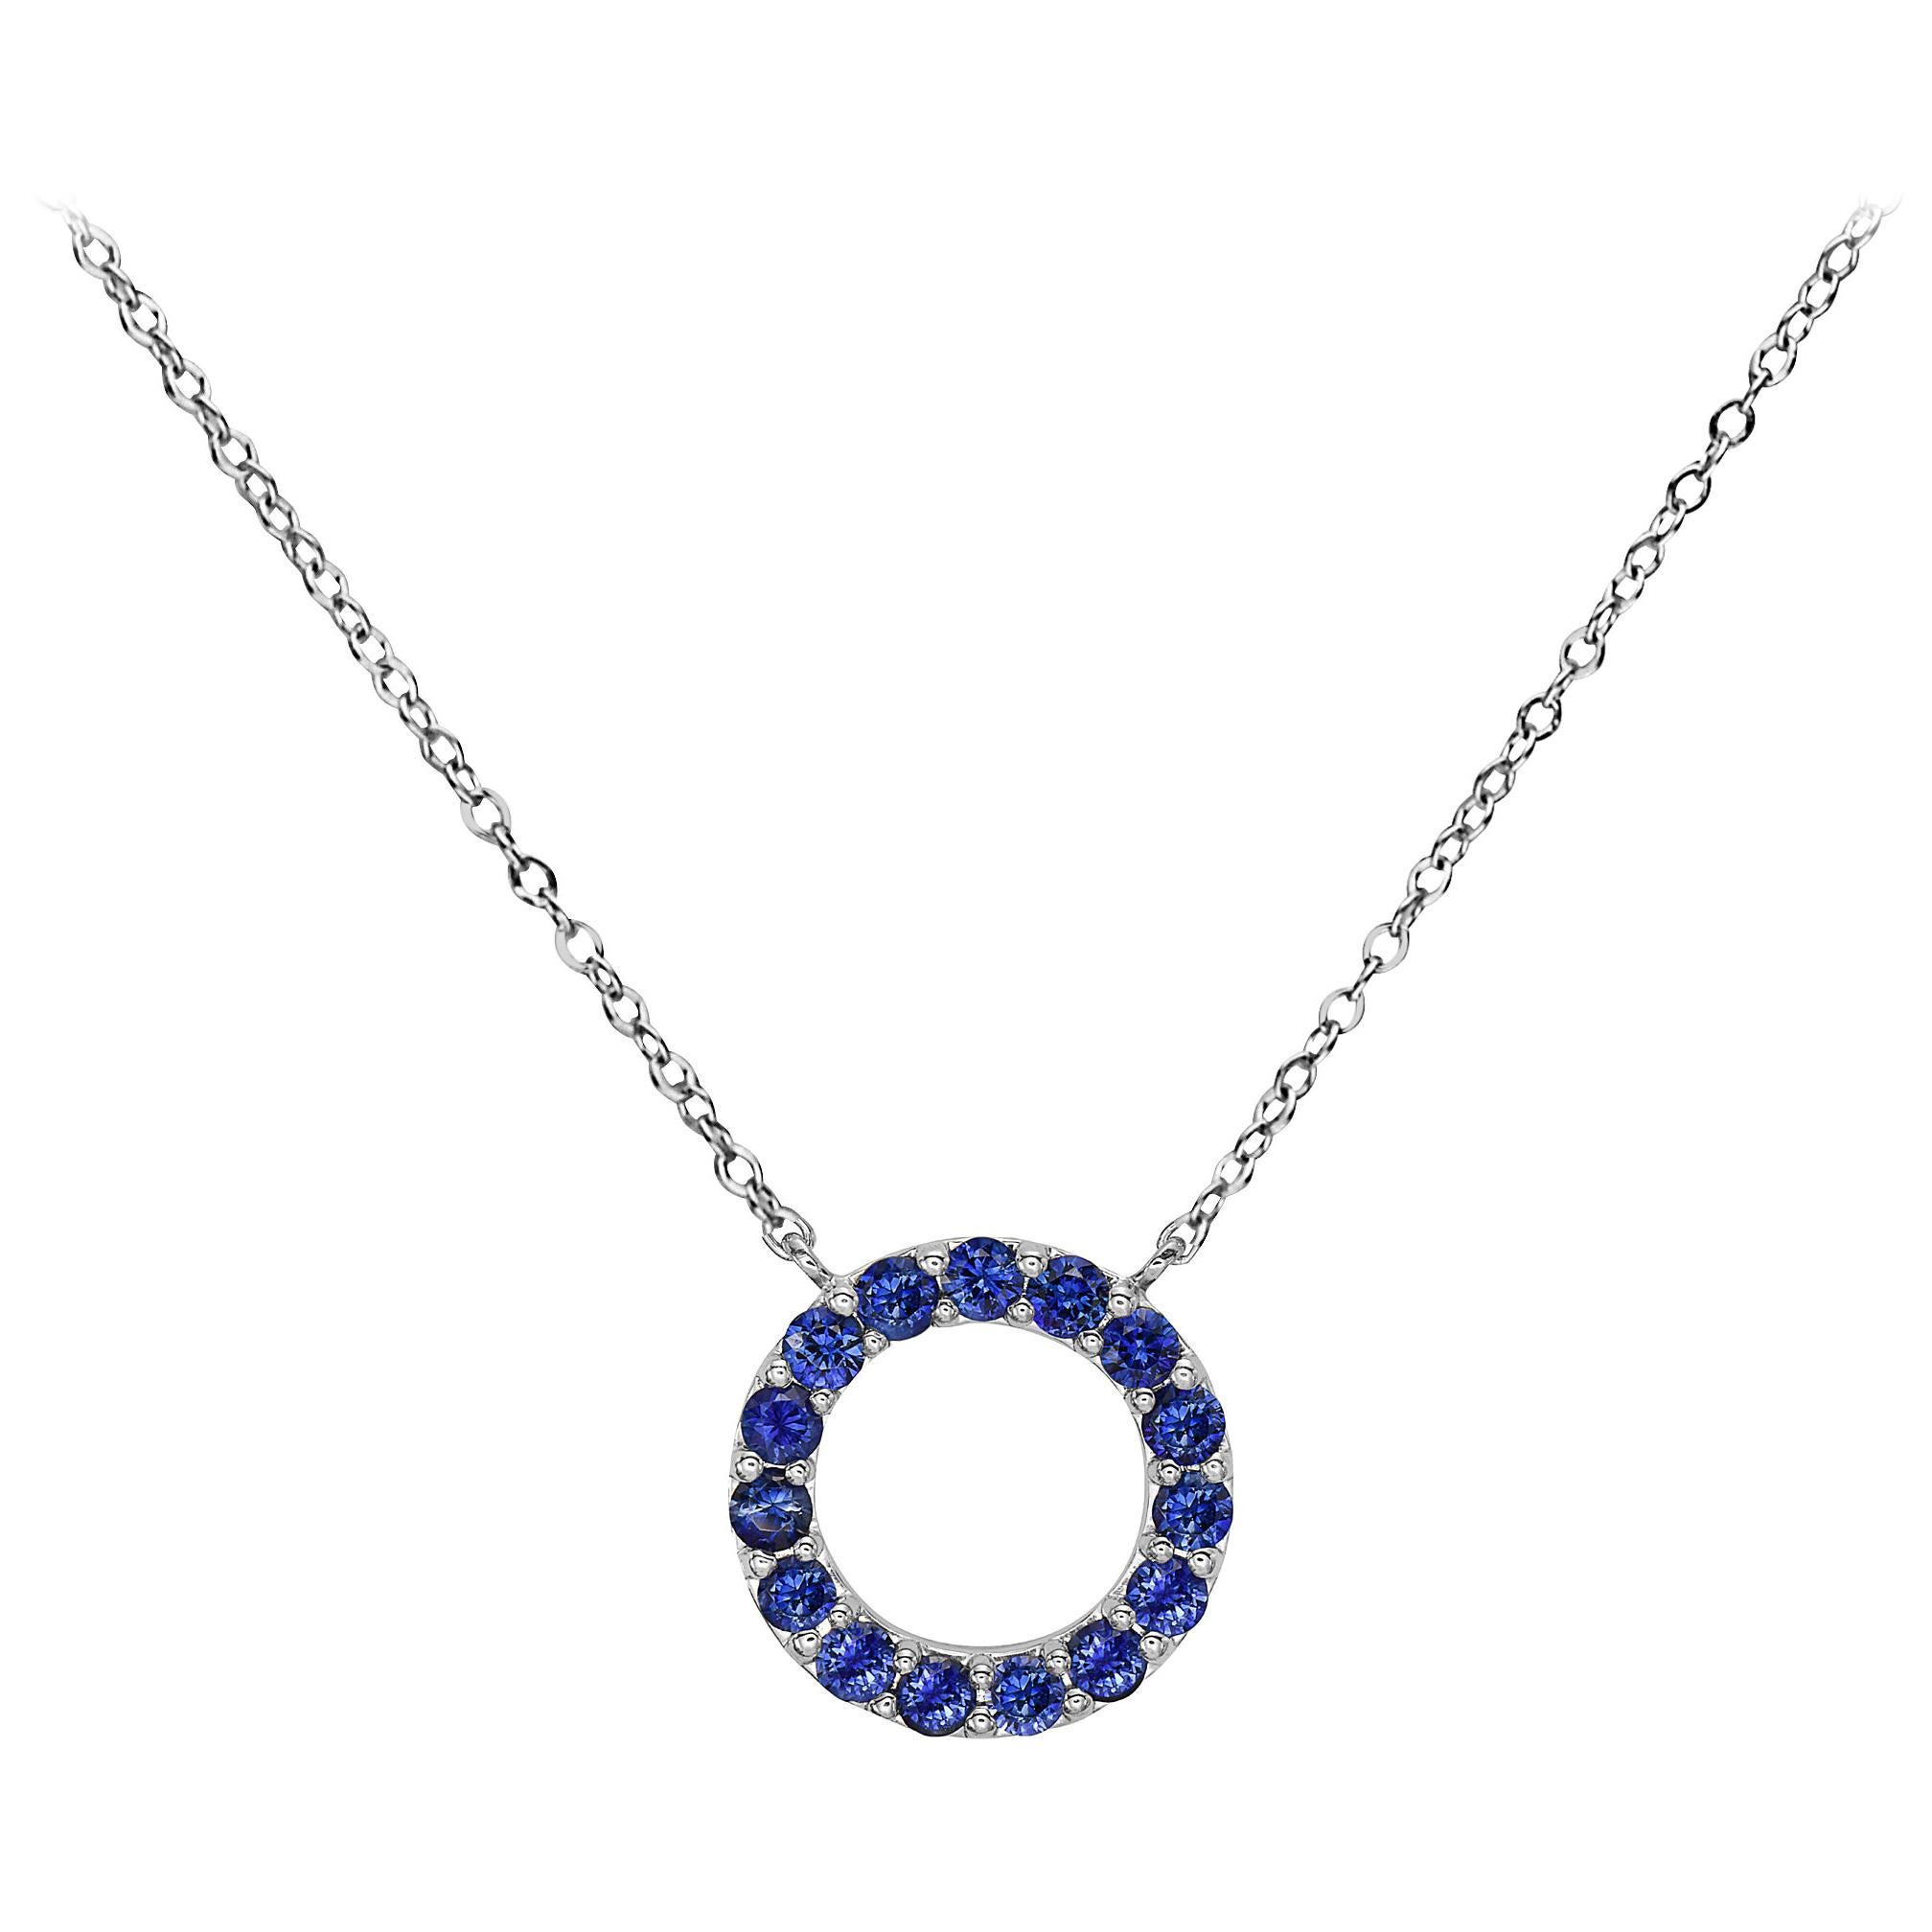 Genuine blue sapphires surround a 9.5-10mm Freshwater half pearl in this statement, yet easy-to-wear pendant. This is a great versatile piece to wear on its own or layer with other necklaces. Enjoy this necklace as an everyday piece! Made with .925